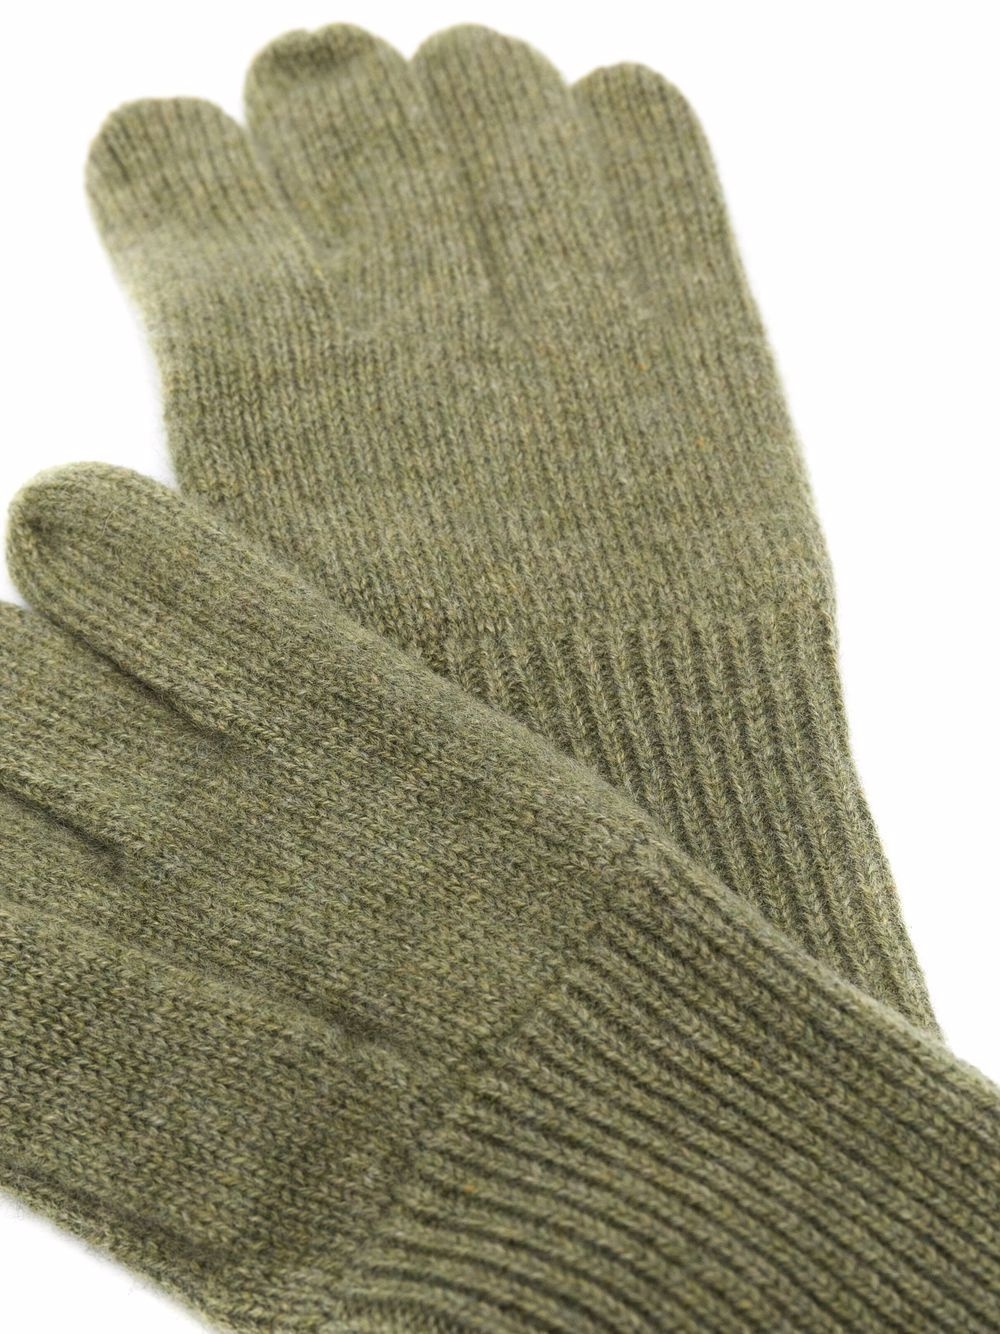 ribbed-knit cashmere gloves - 2